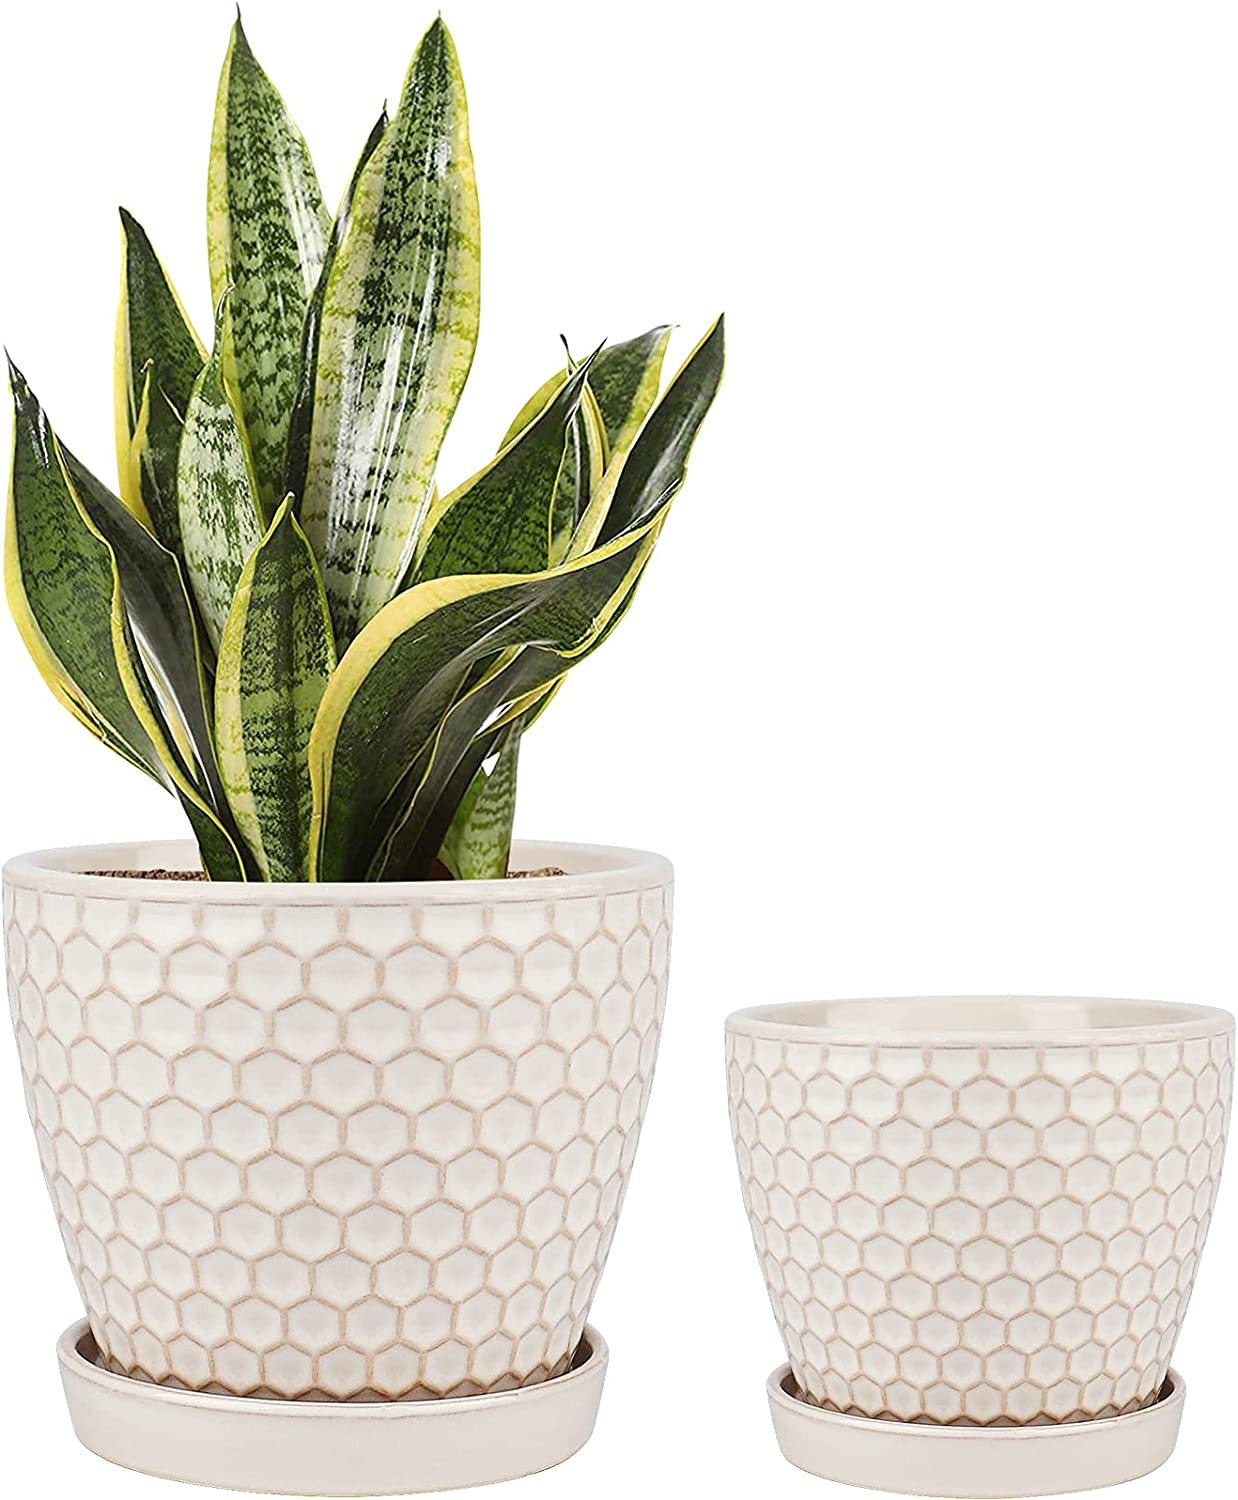 Primary image for Docrin Plant Pots Indoor- 6.6 And 5.5 Inch,Ceramic Planters With Drainage, White